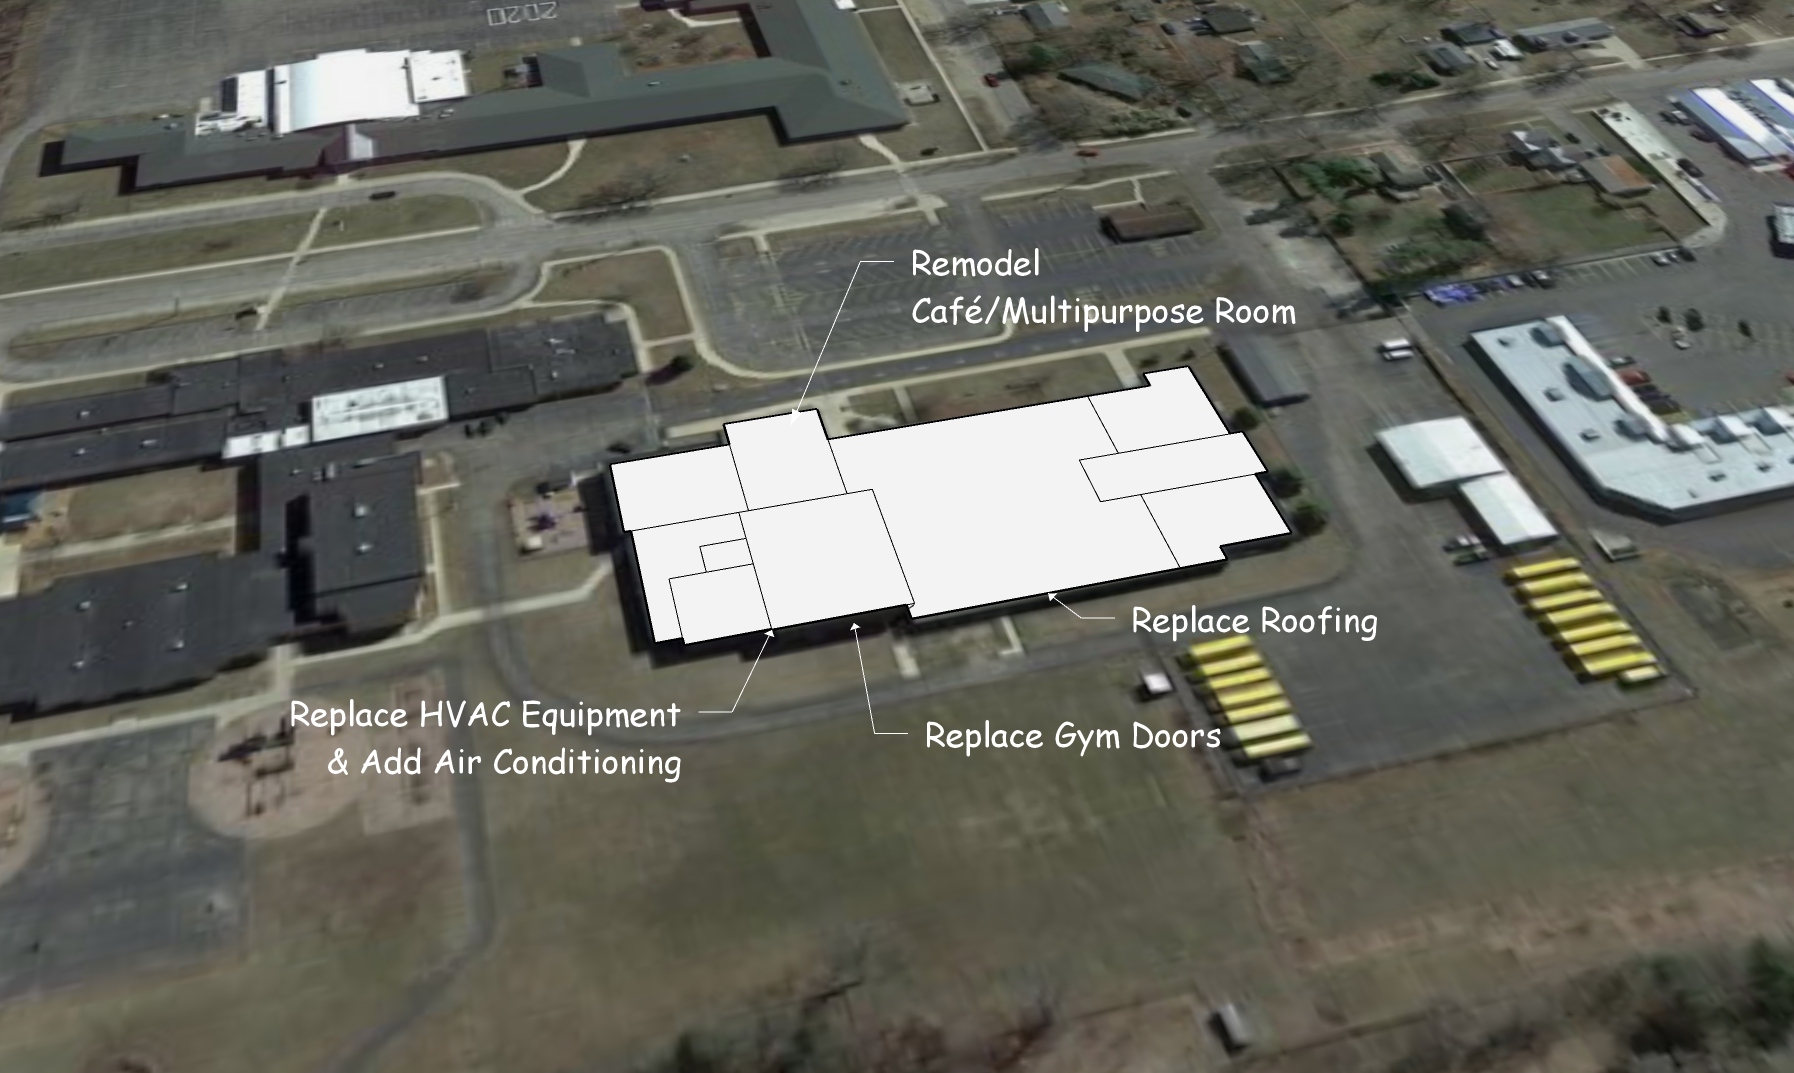 Middle School proposed updates architectural drawing 2023 bond